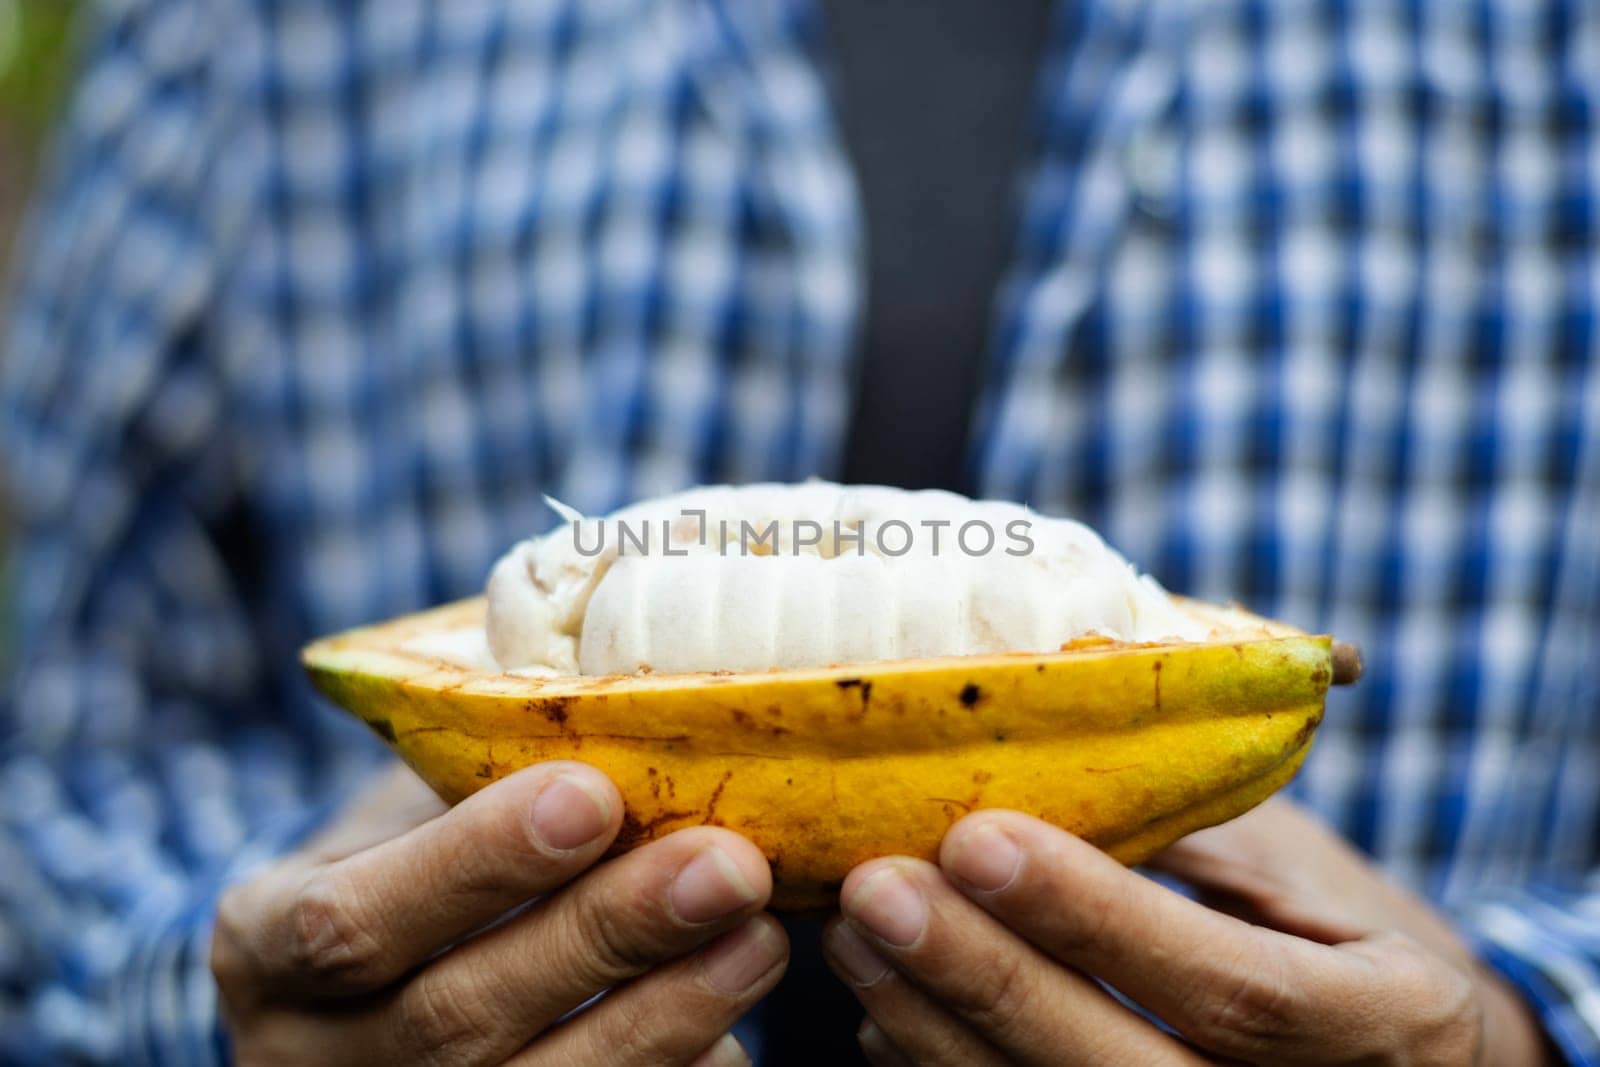 Woman Farmer holding a ripe cocoa fruit with beans inside.